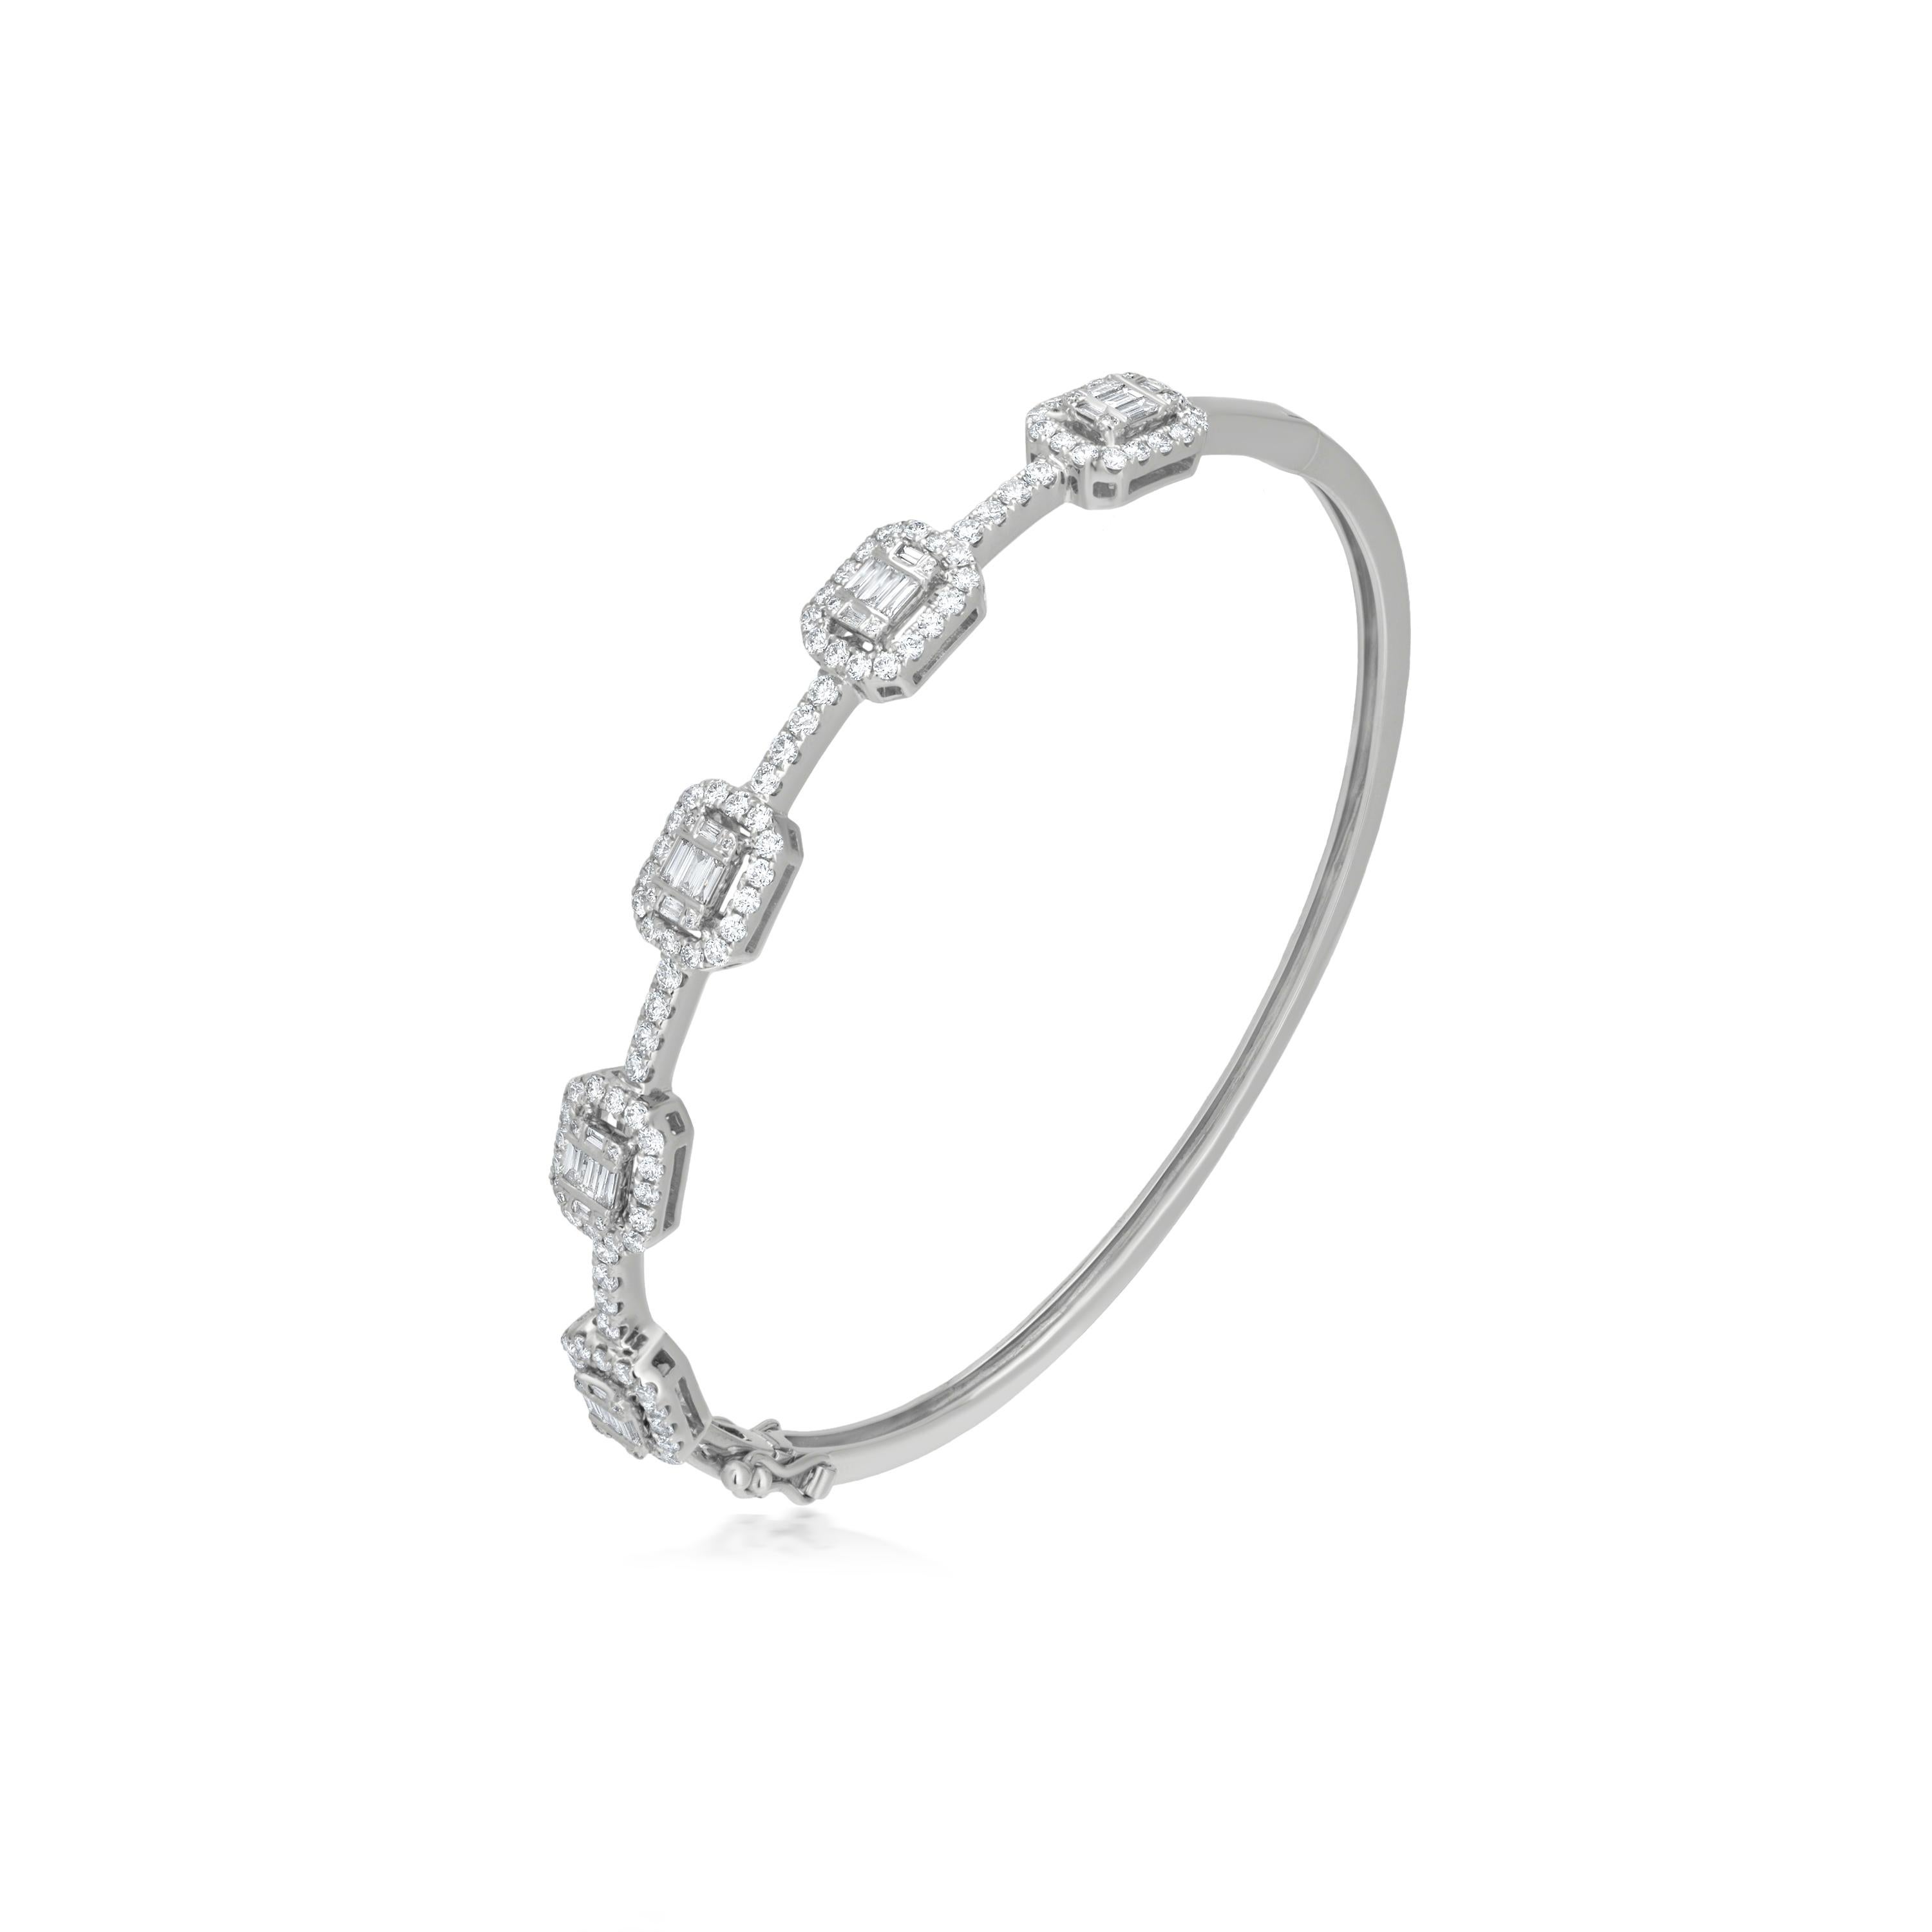 Adorn yourself with this spectacular diamond frames bangle bracelet of Luxle. Wrapping the front of the wrist in stately and sophisticated frames of 1.43 ct. t.w. baguette diamonds accentuated by round diamond halo. The frames are mounted on